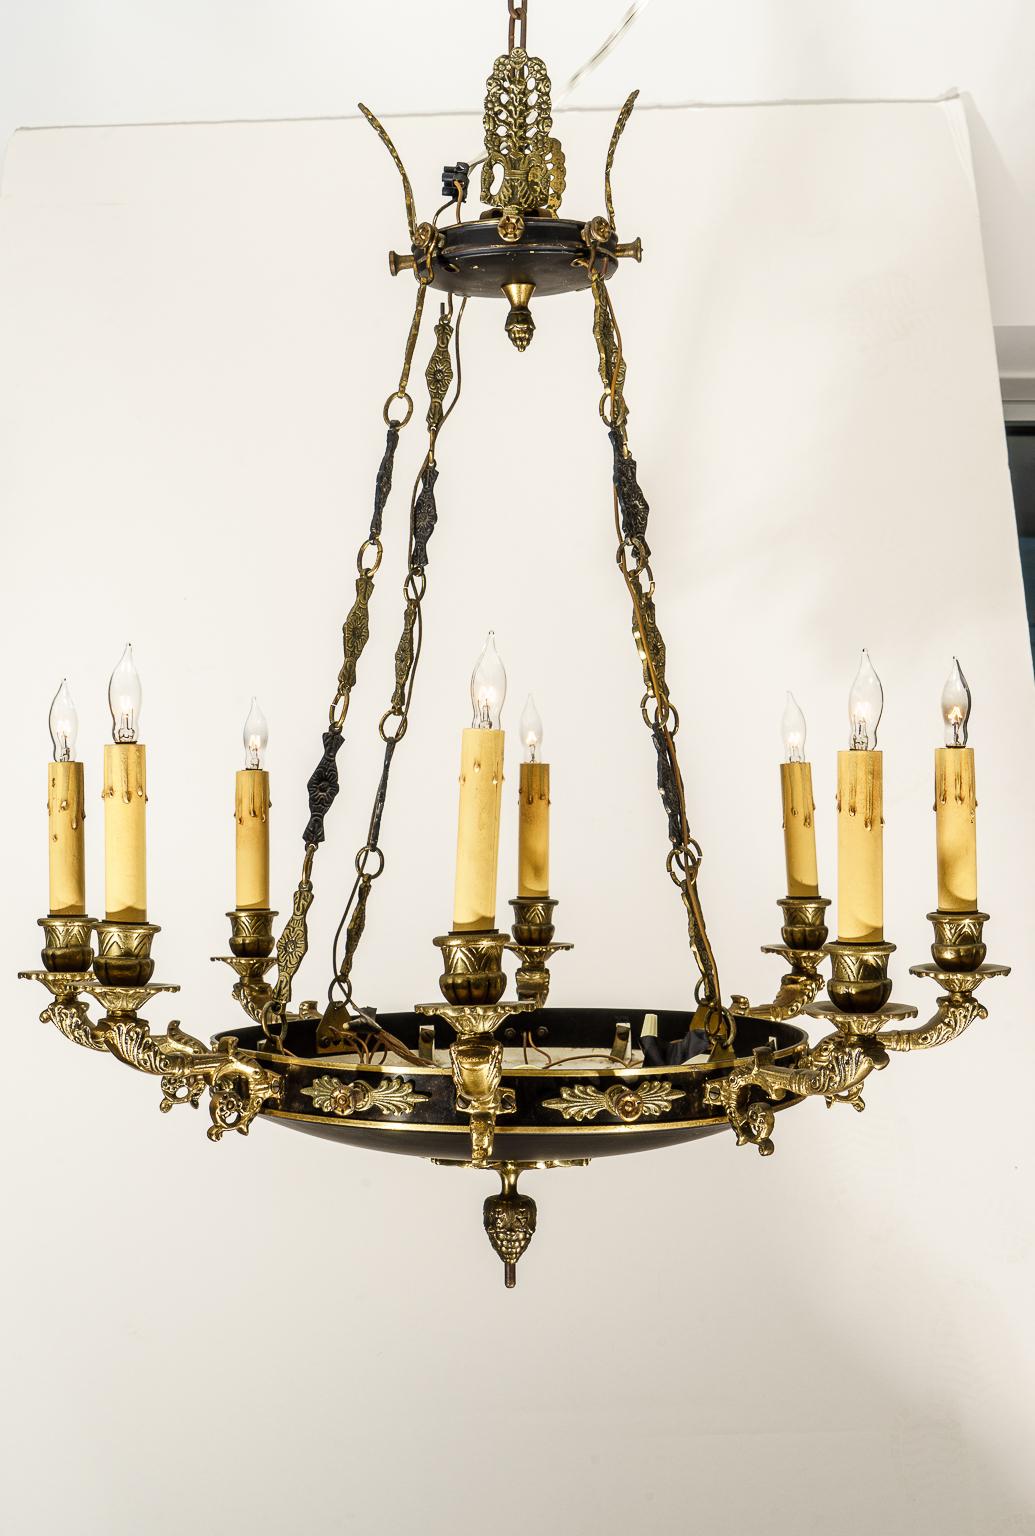 This sylish French Empire revival style chandelier was acquired from a Palm Beach estate.

Note: Height of the chandelier not including the chain is 28.50